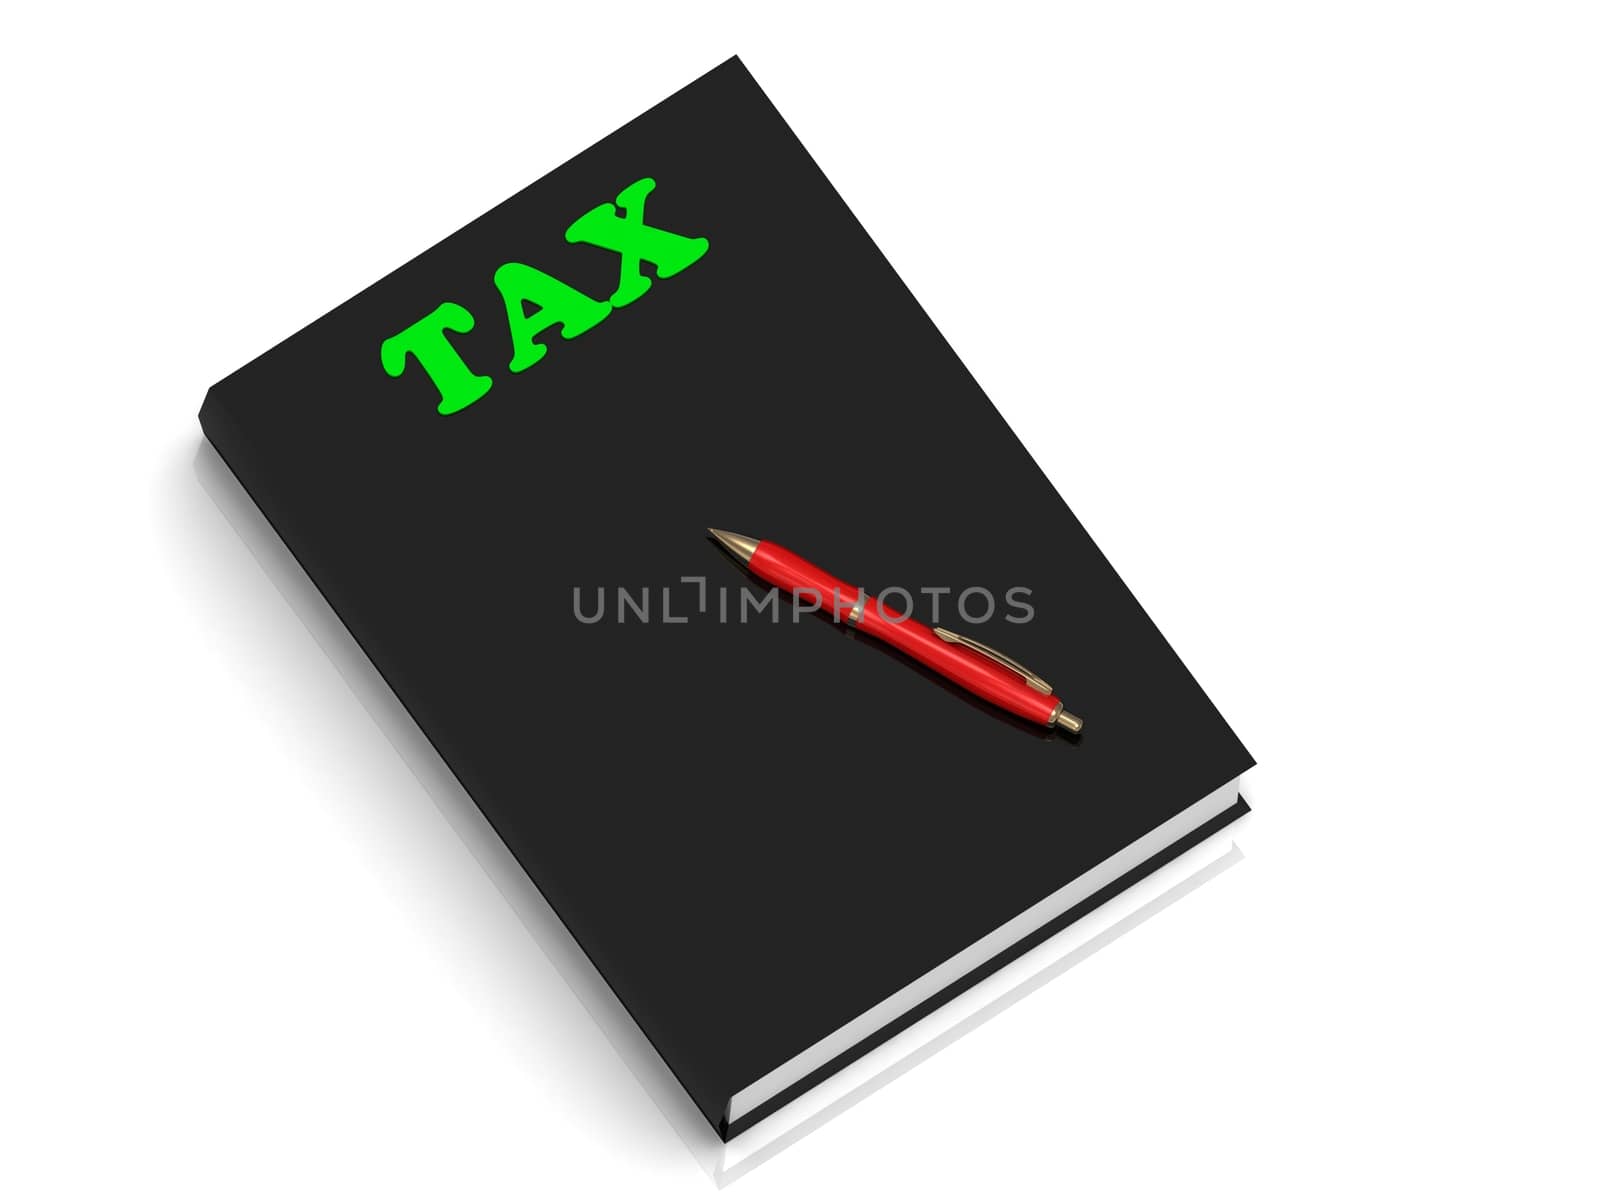 TAX- inscription of green letters on black book by GreenMost